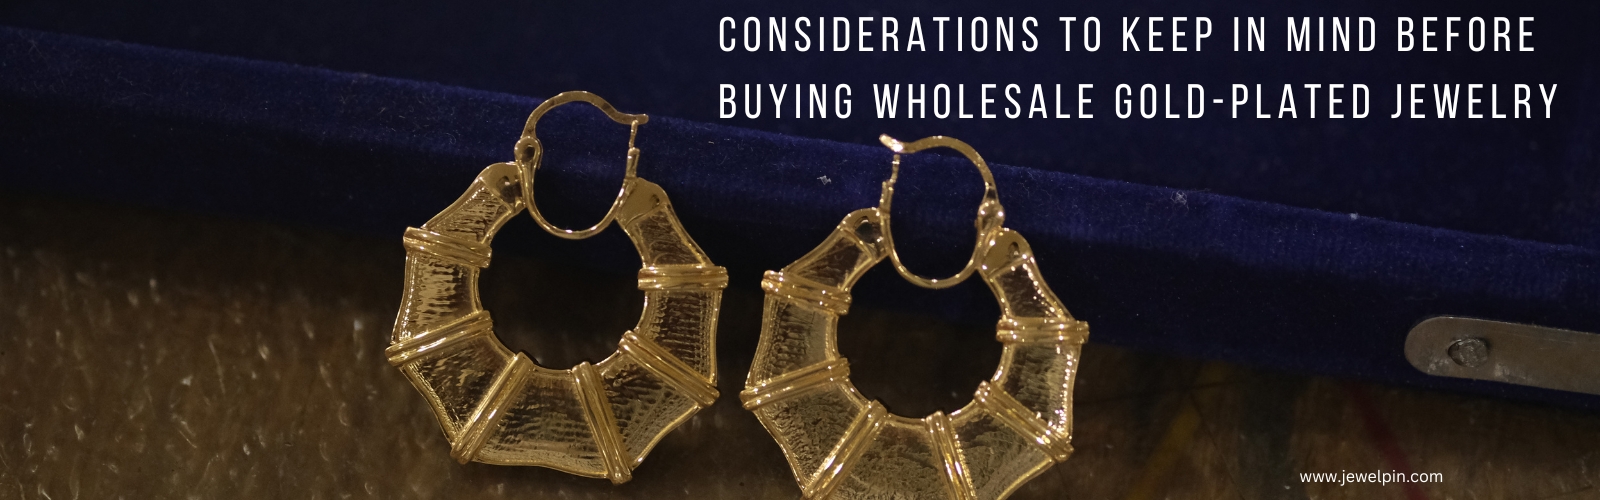 Jewelpin - Considerations to Keep in Mind Before Buying Wholesale Gold-Plated Jewellery